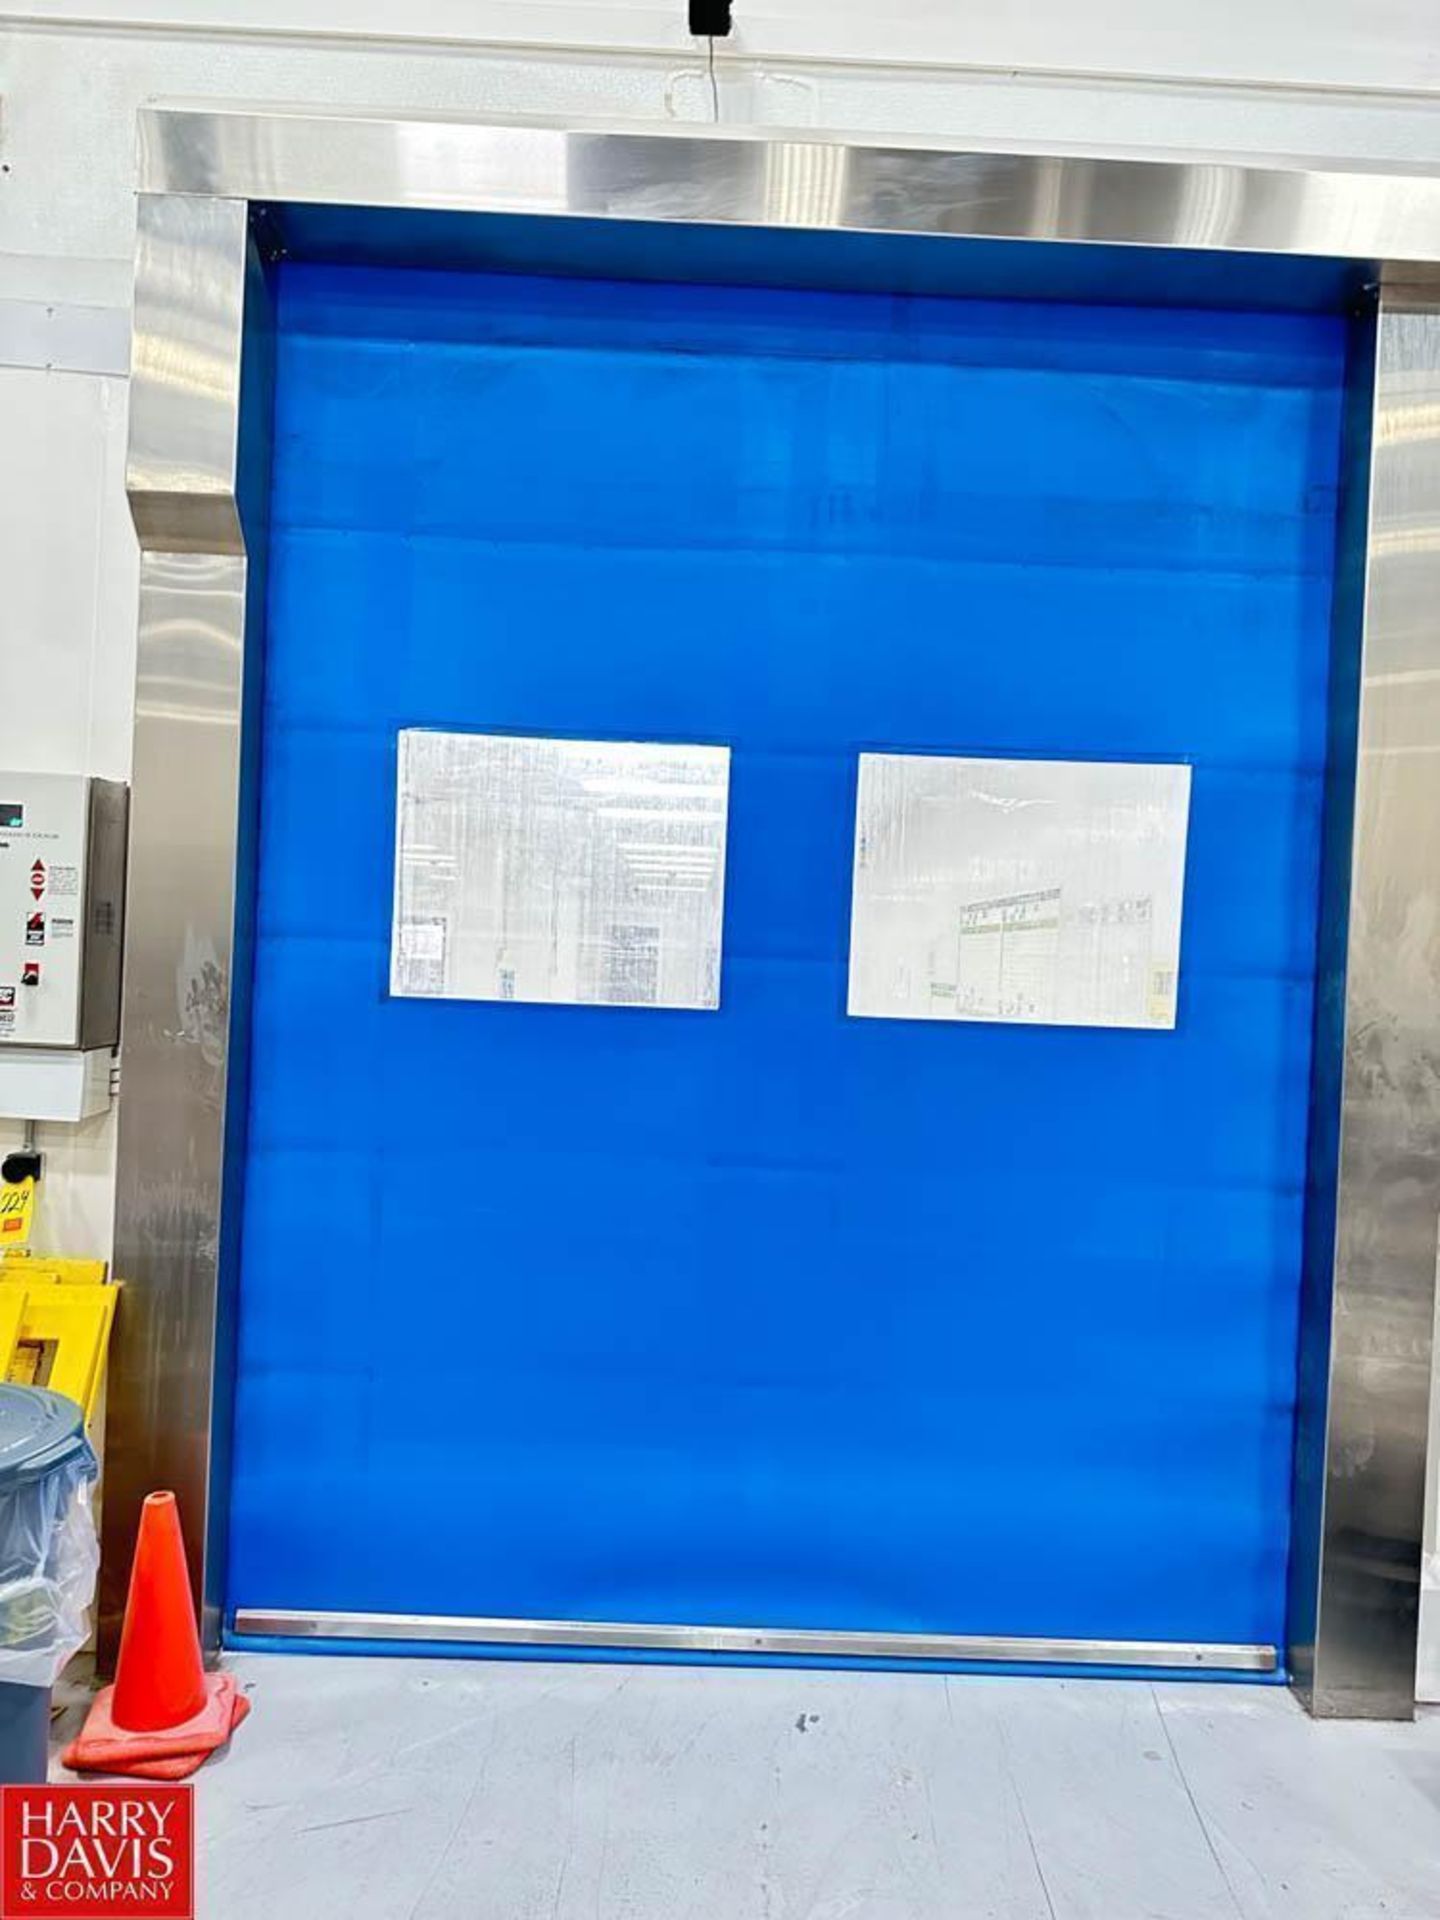 Rytec High Speed Roll-Up Door, Dimensions = 96" Width x 110" Height - Rigging Fee: $1250 - Image 2 of 2